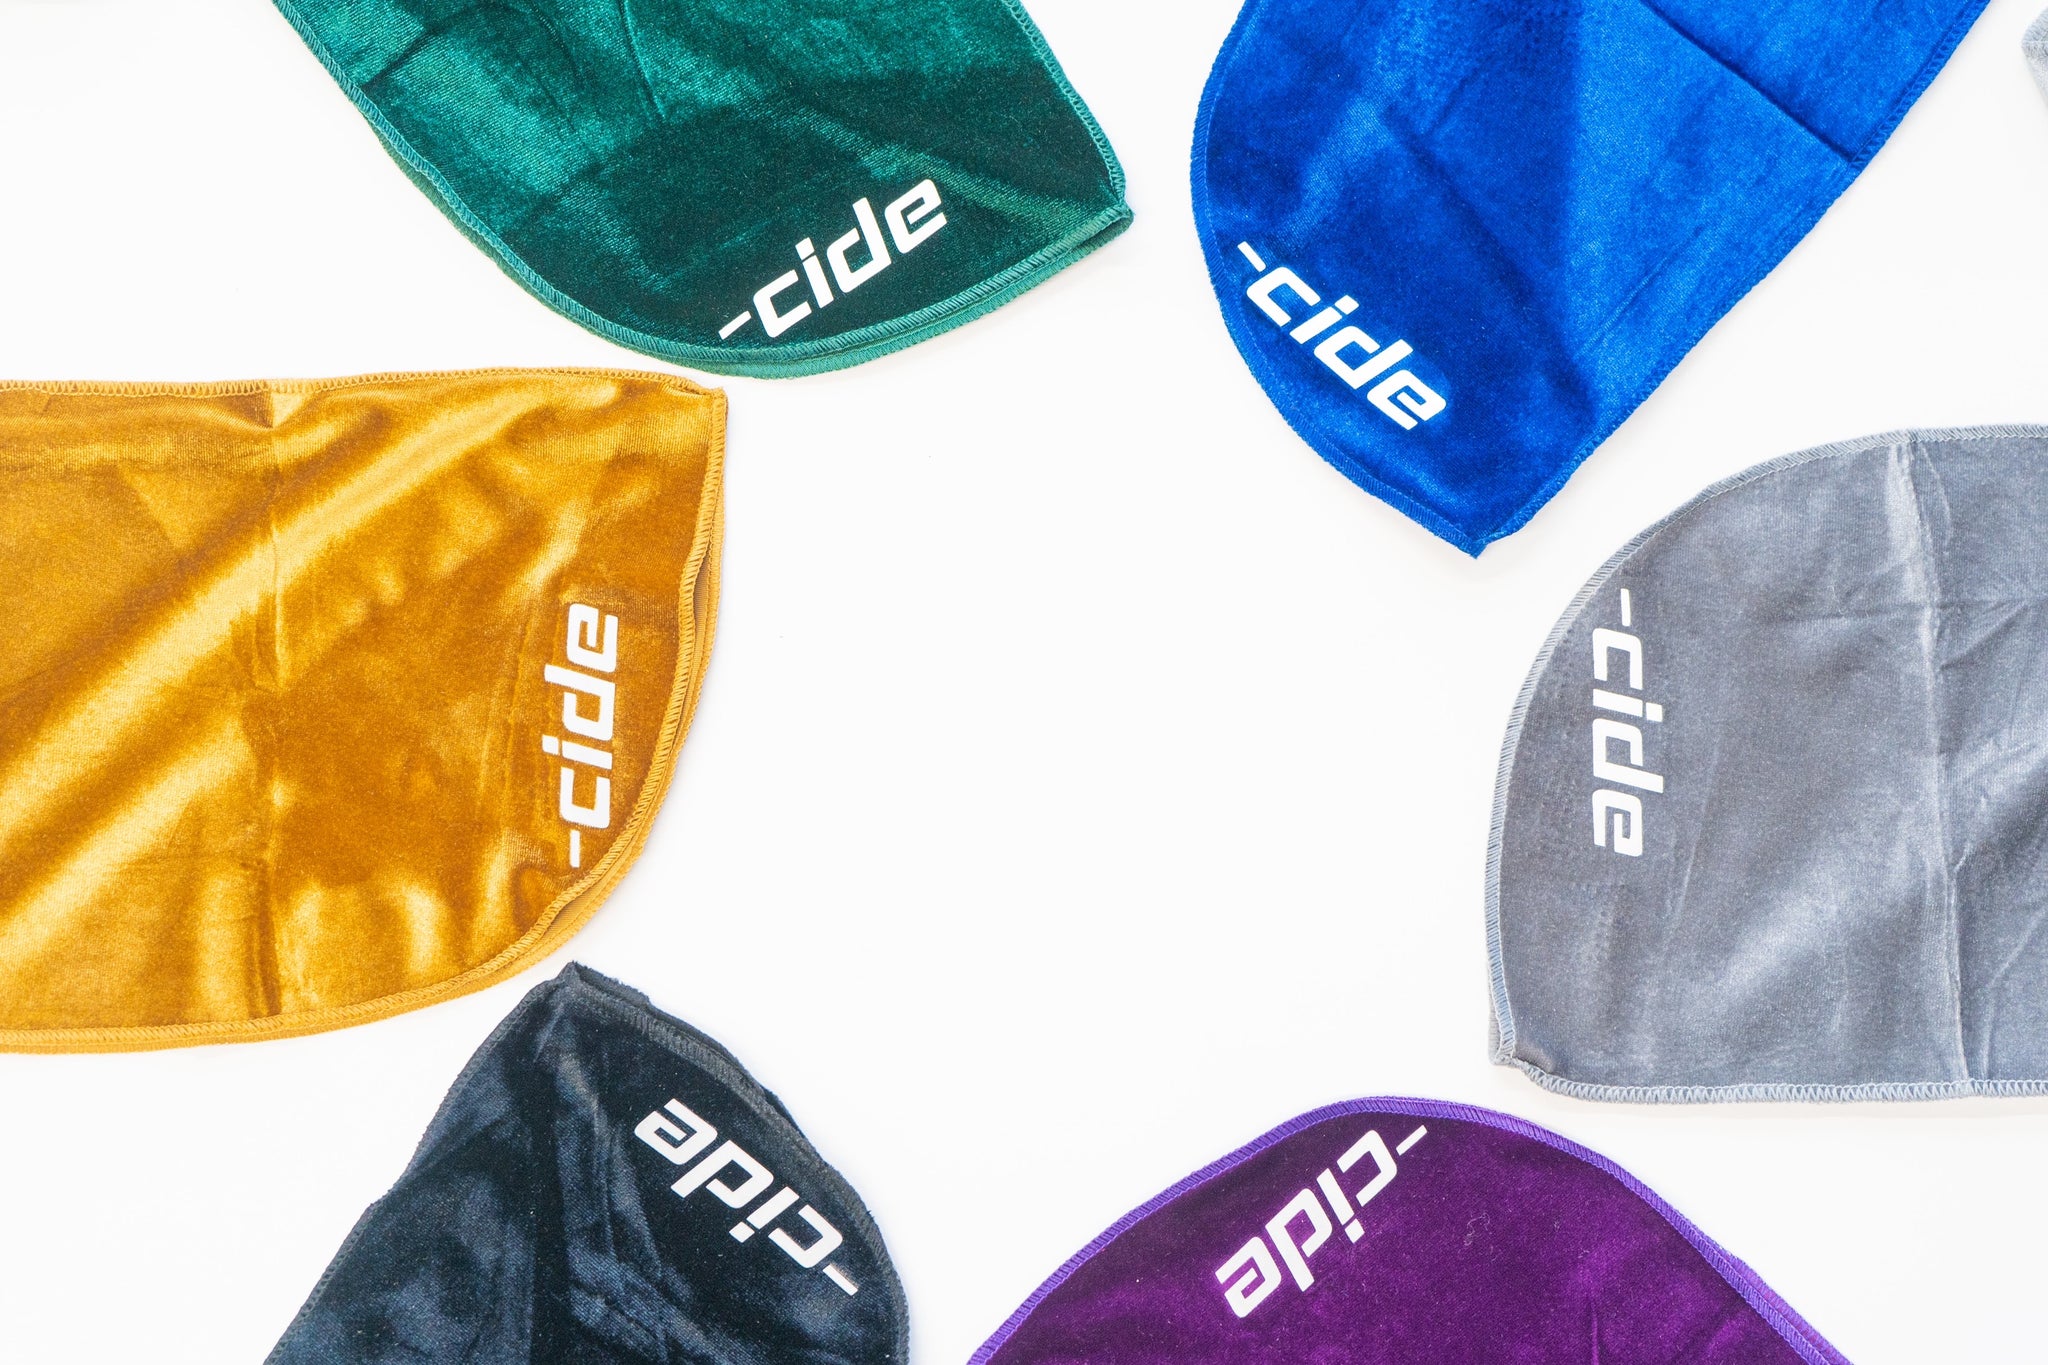 -cide Durags